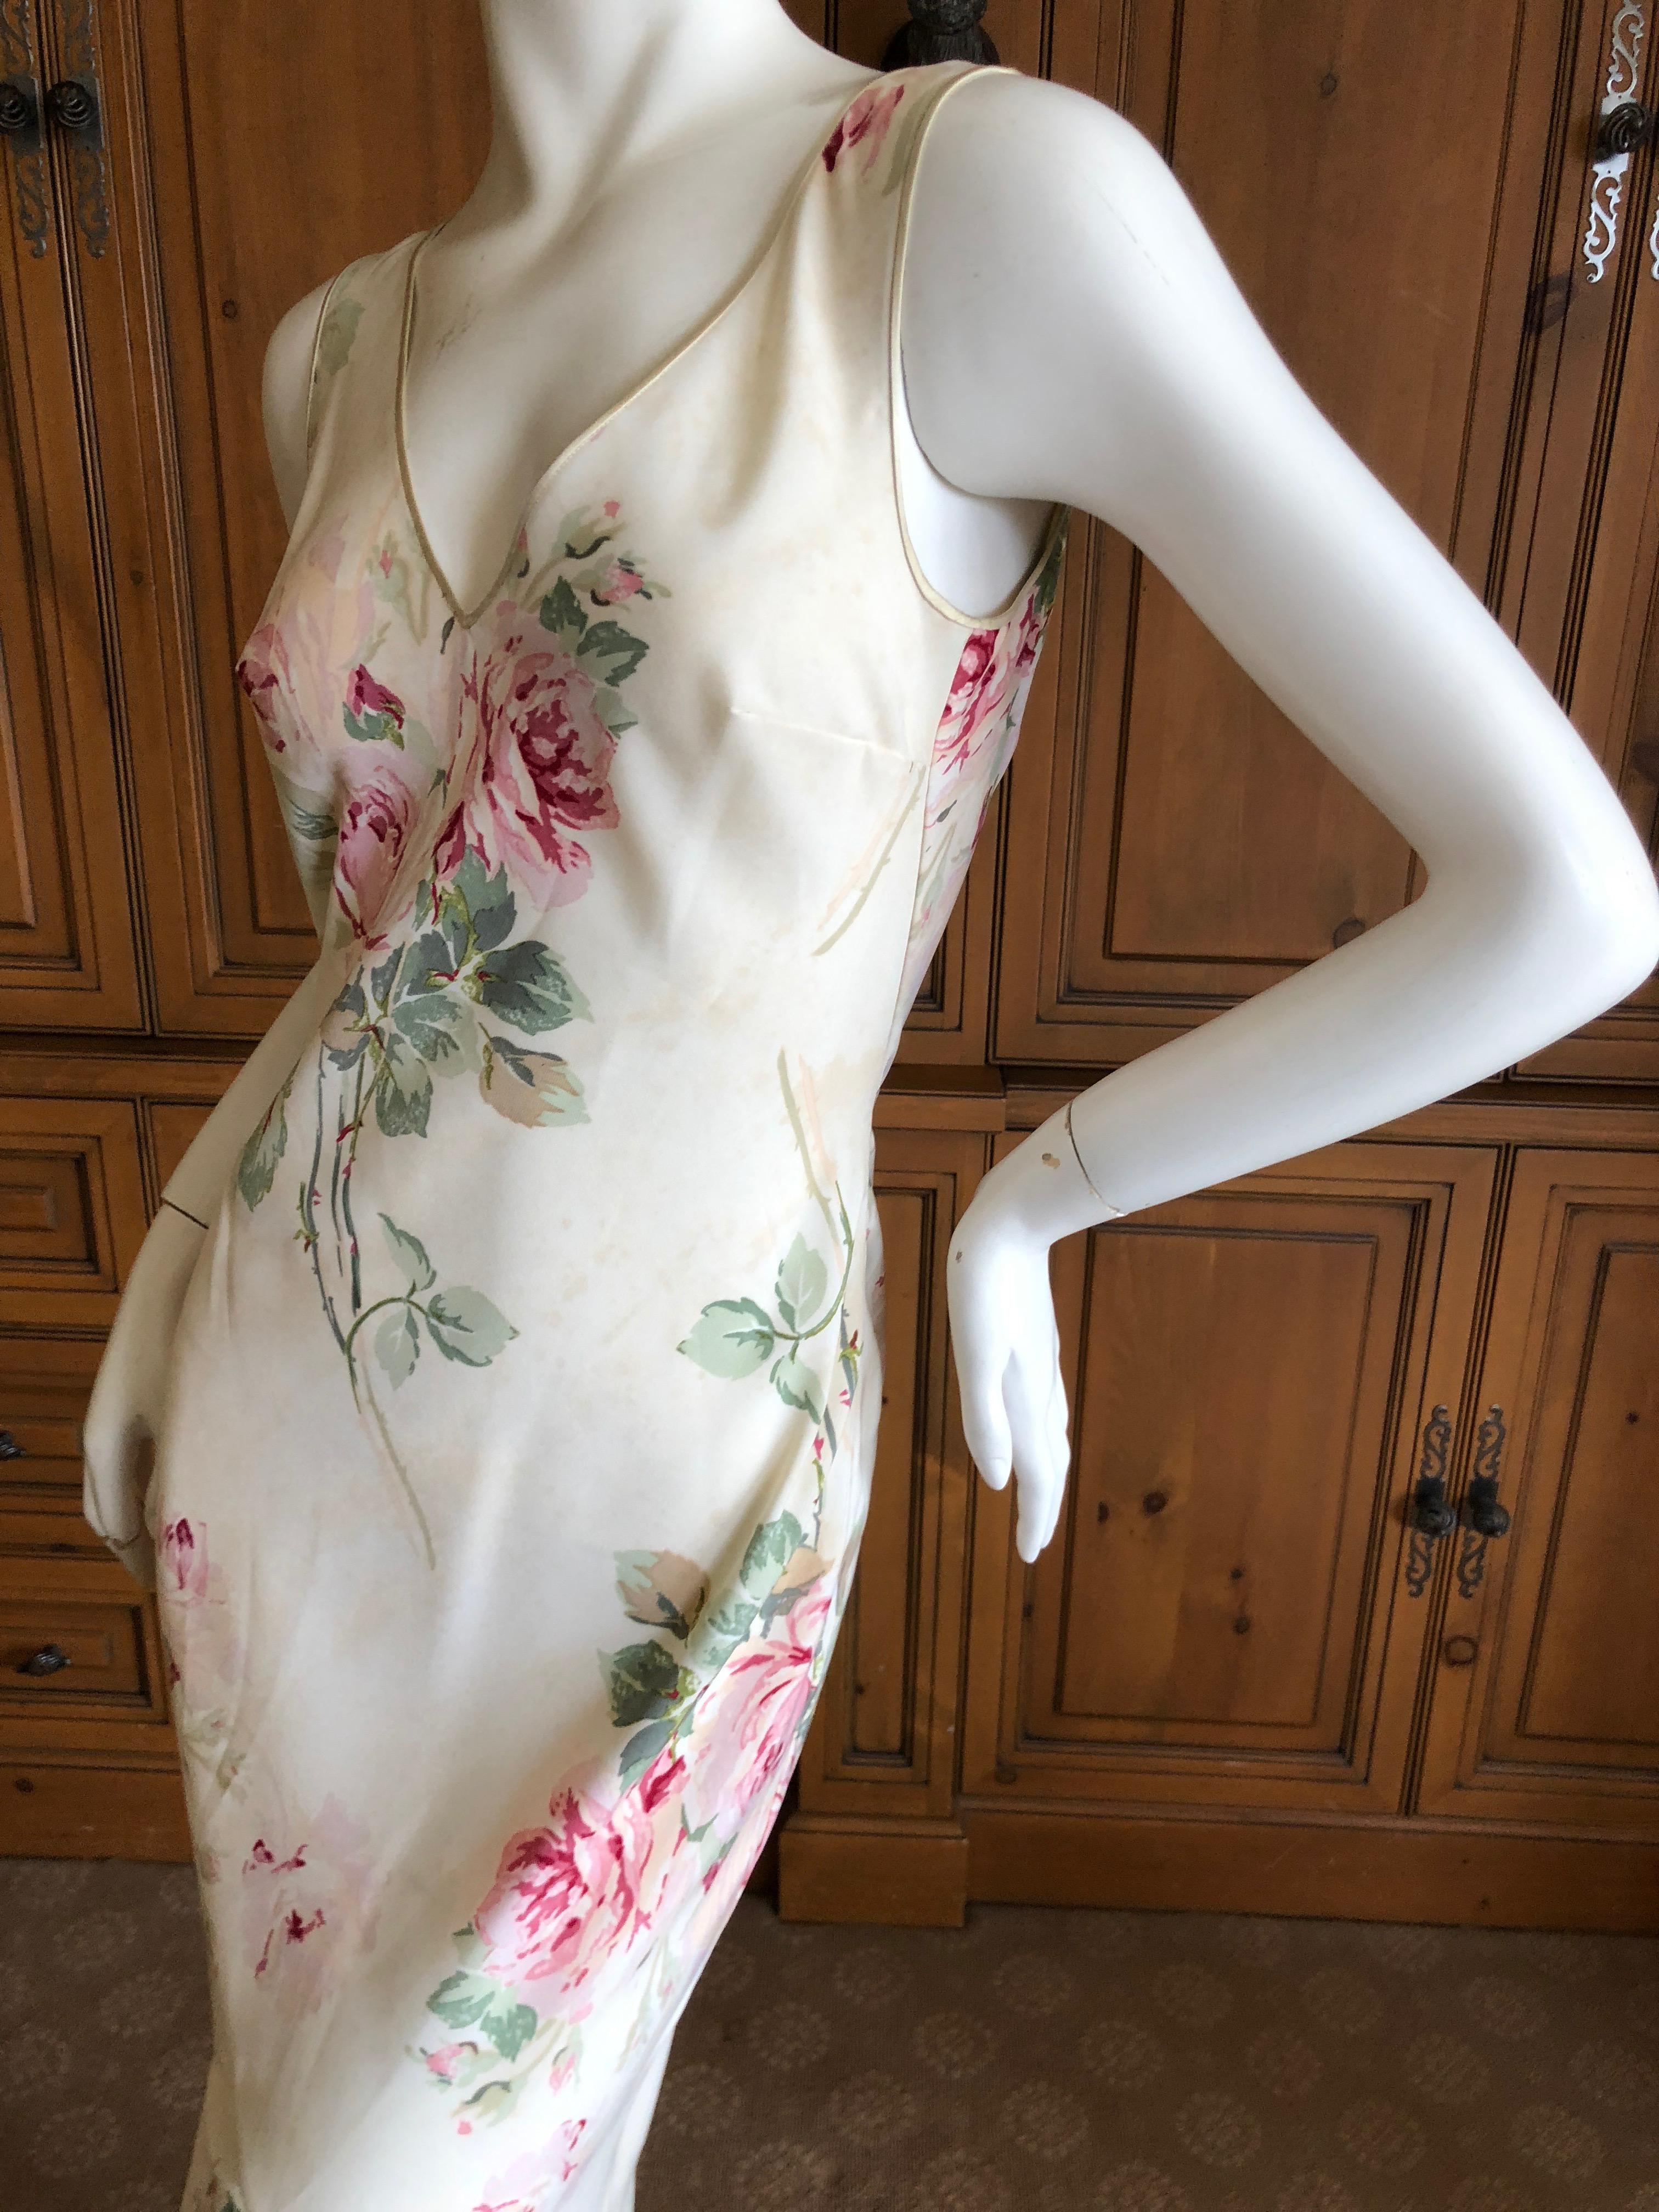 John Galliano Bias Cut Floral Dress with Draped Back and Train, 1990s  For Sale 7